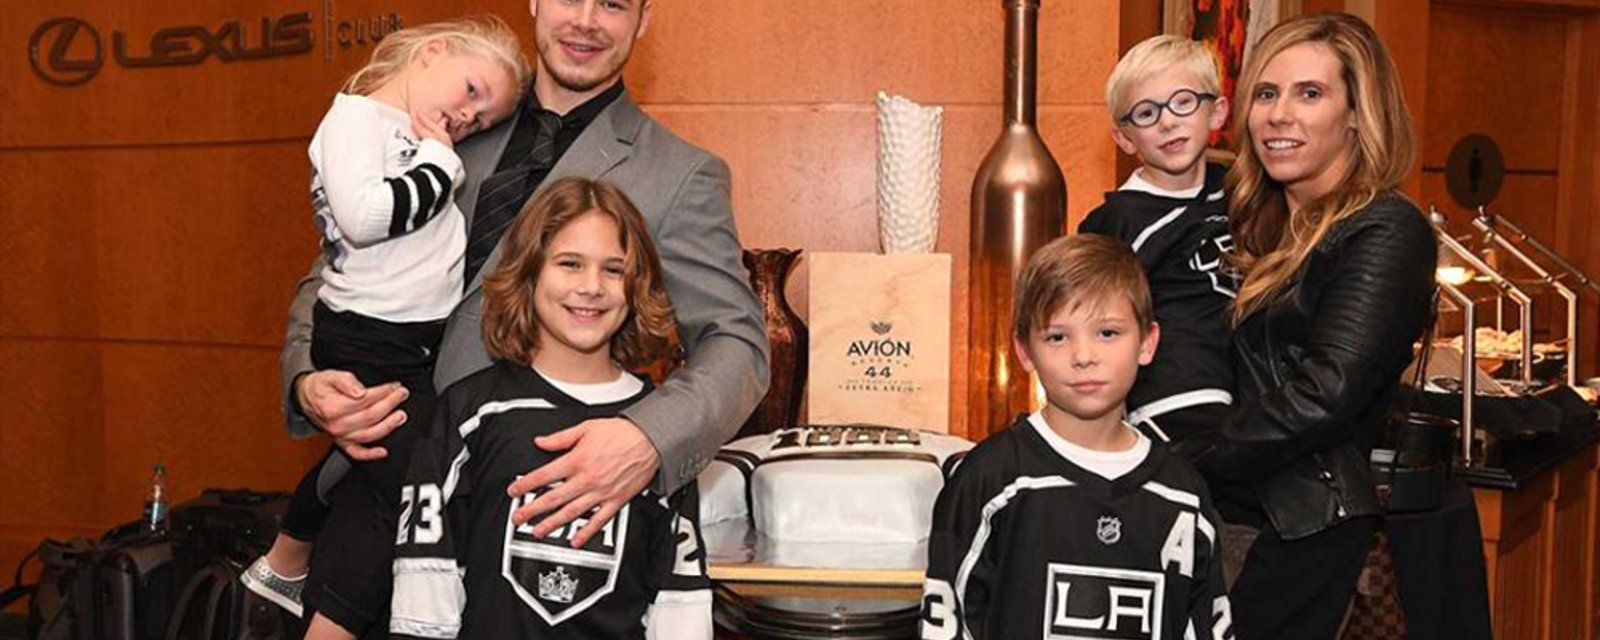 Dustin Brown's wife Nicole named Executive Director within Kings organization